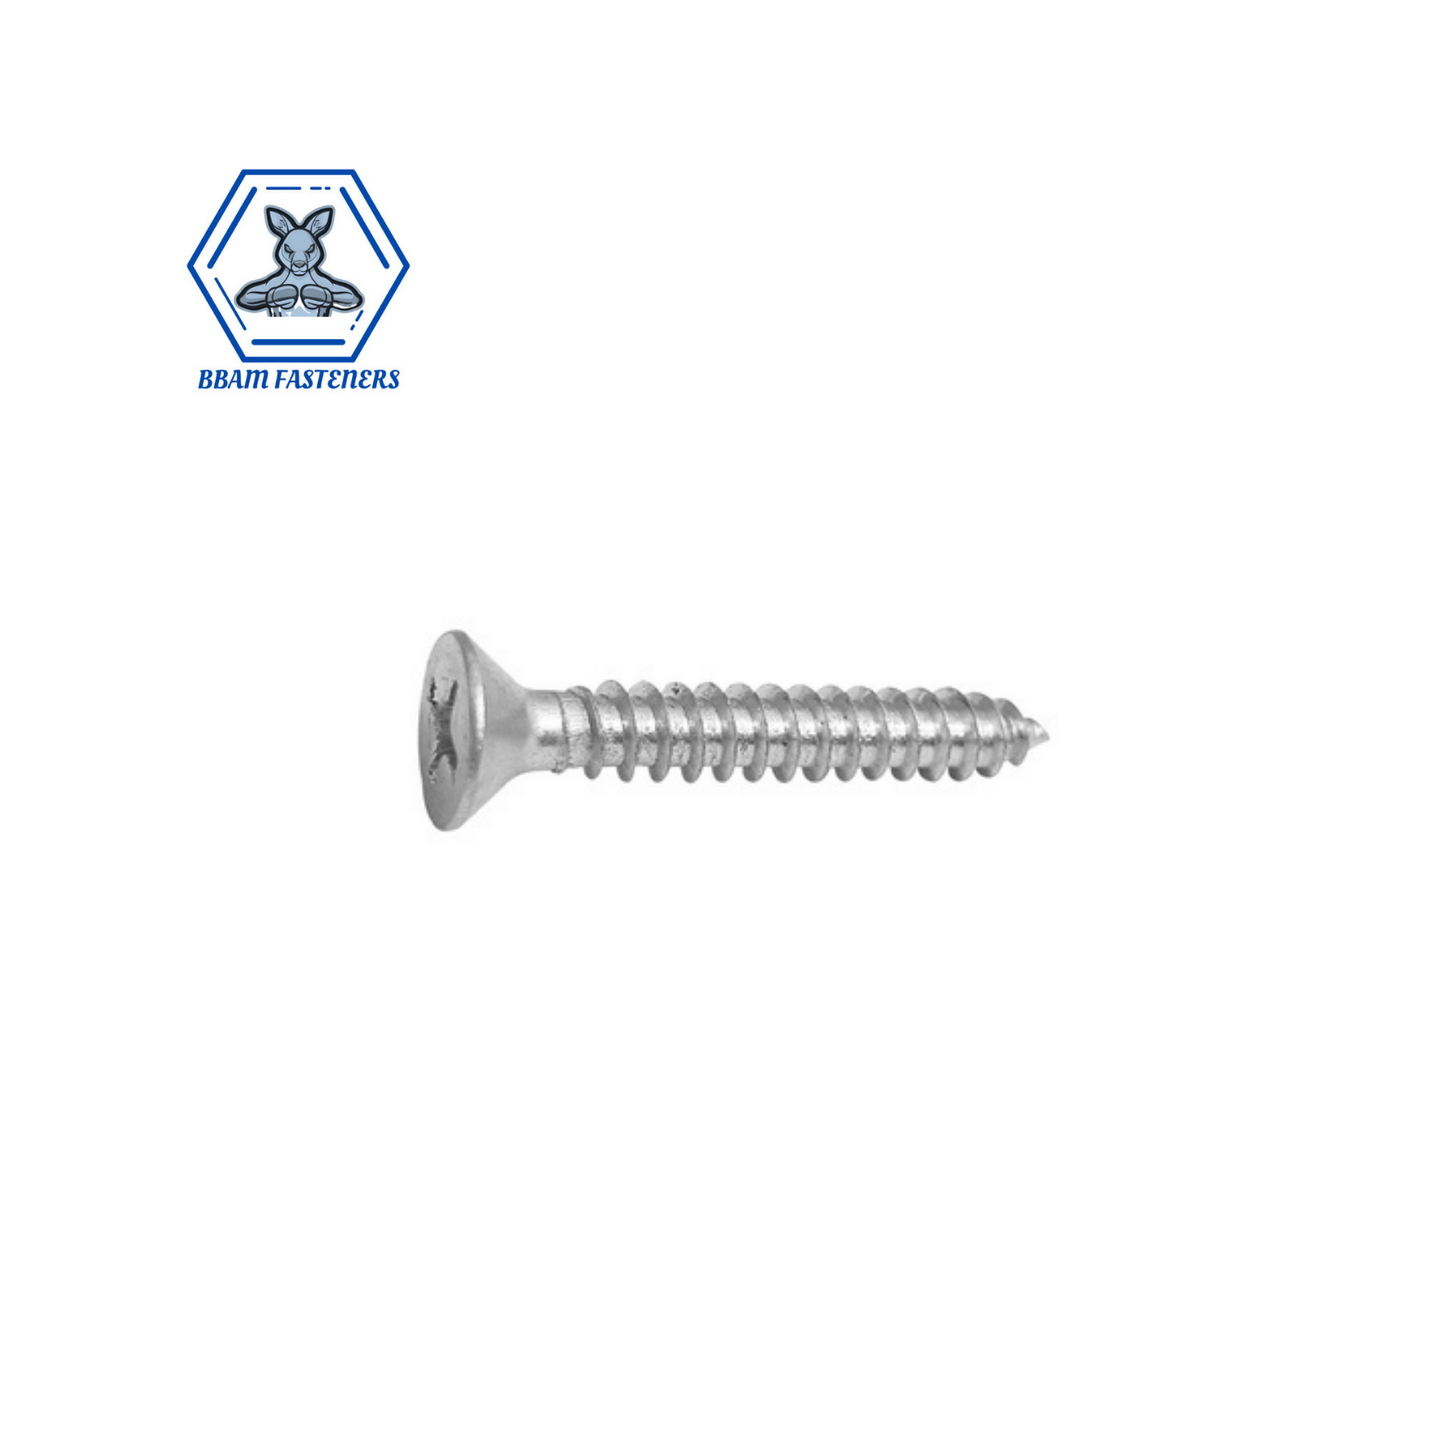 8G x 45mm Self Tapping Screw Countersunk Zinc Plated